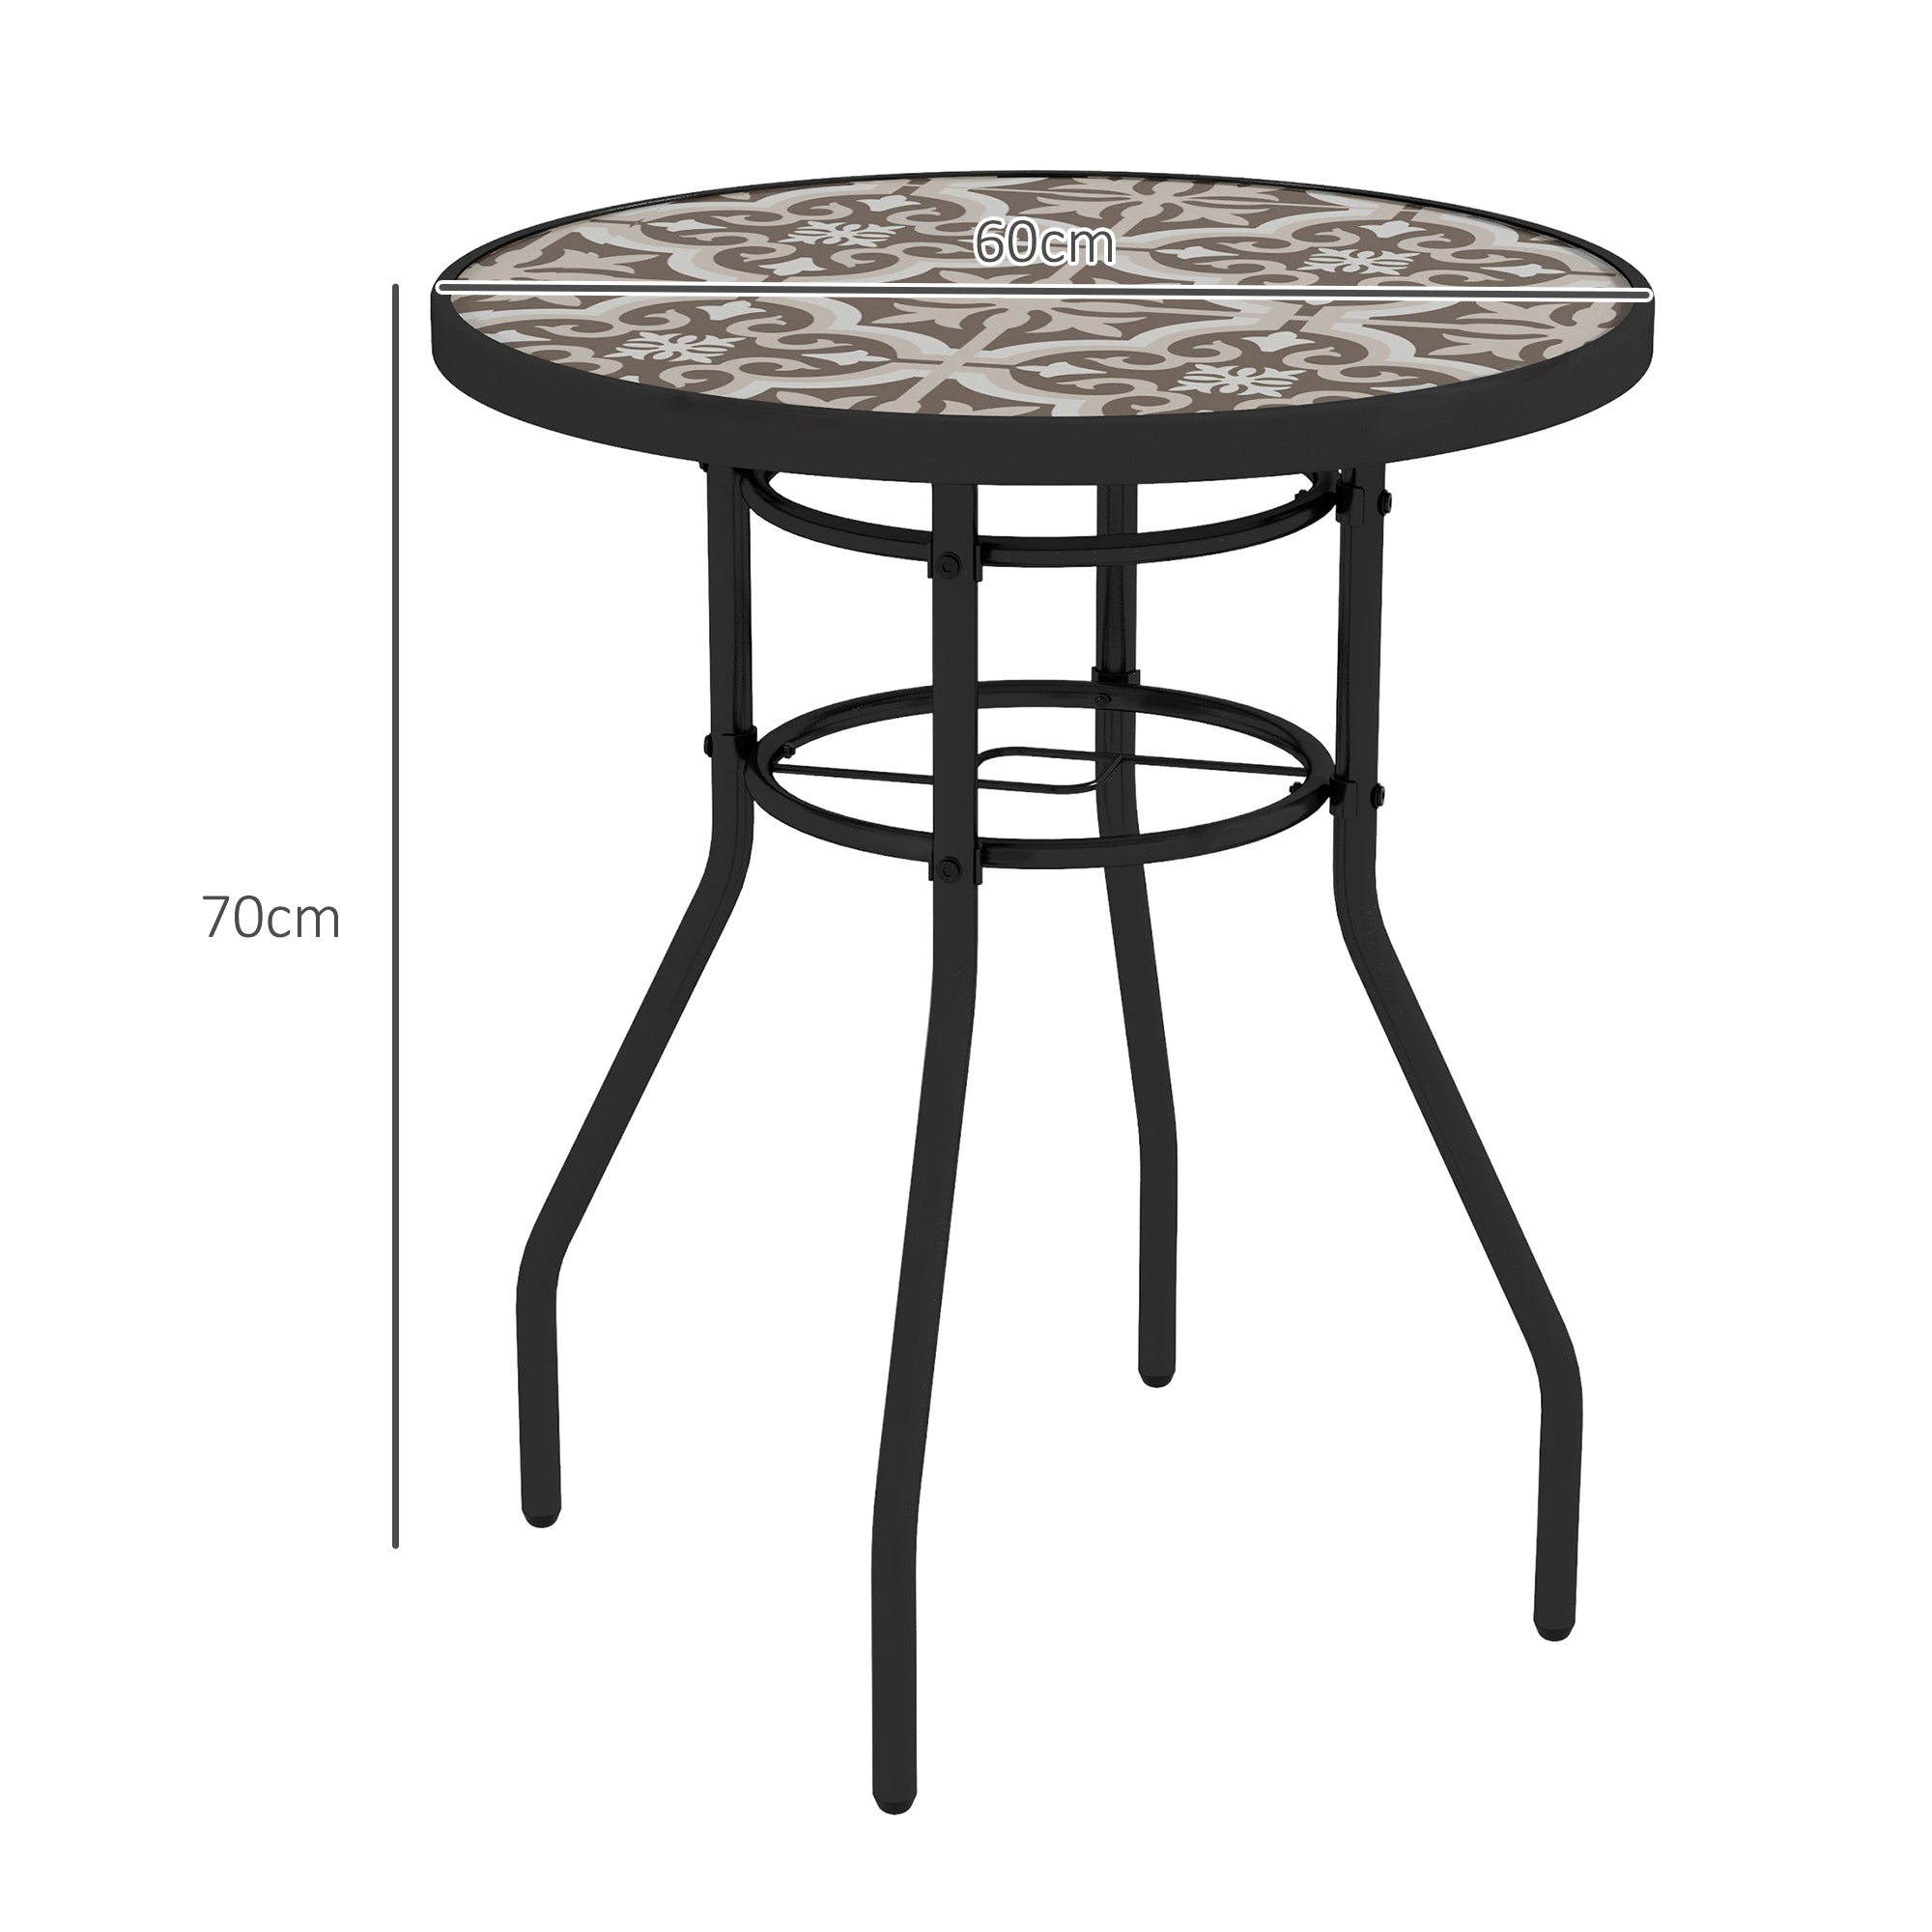 Tempered Glass Top Garden Table with Glass Printed Design, Steel Frame, Foot Pads for Porch, Balcony, Tan Brown-2